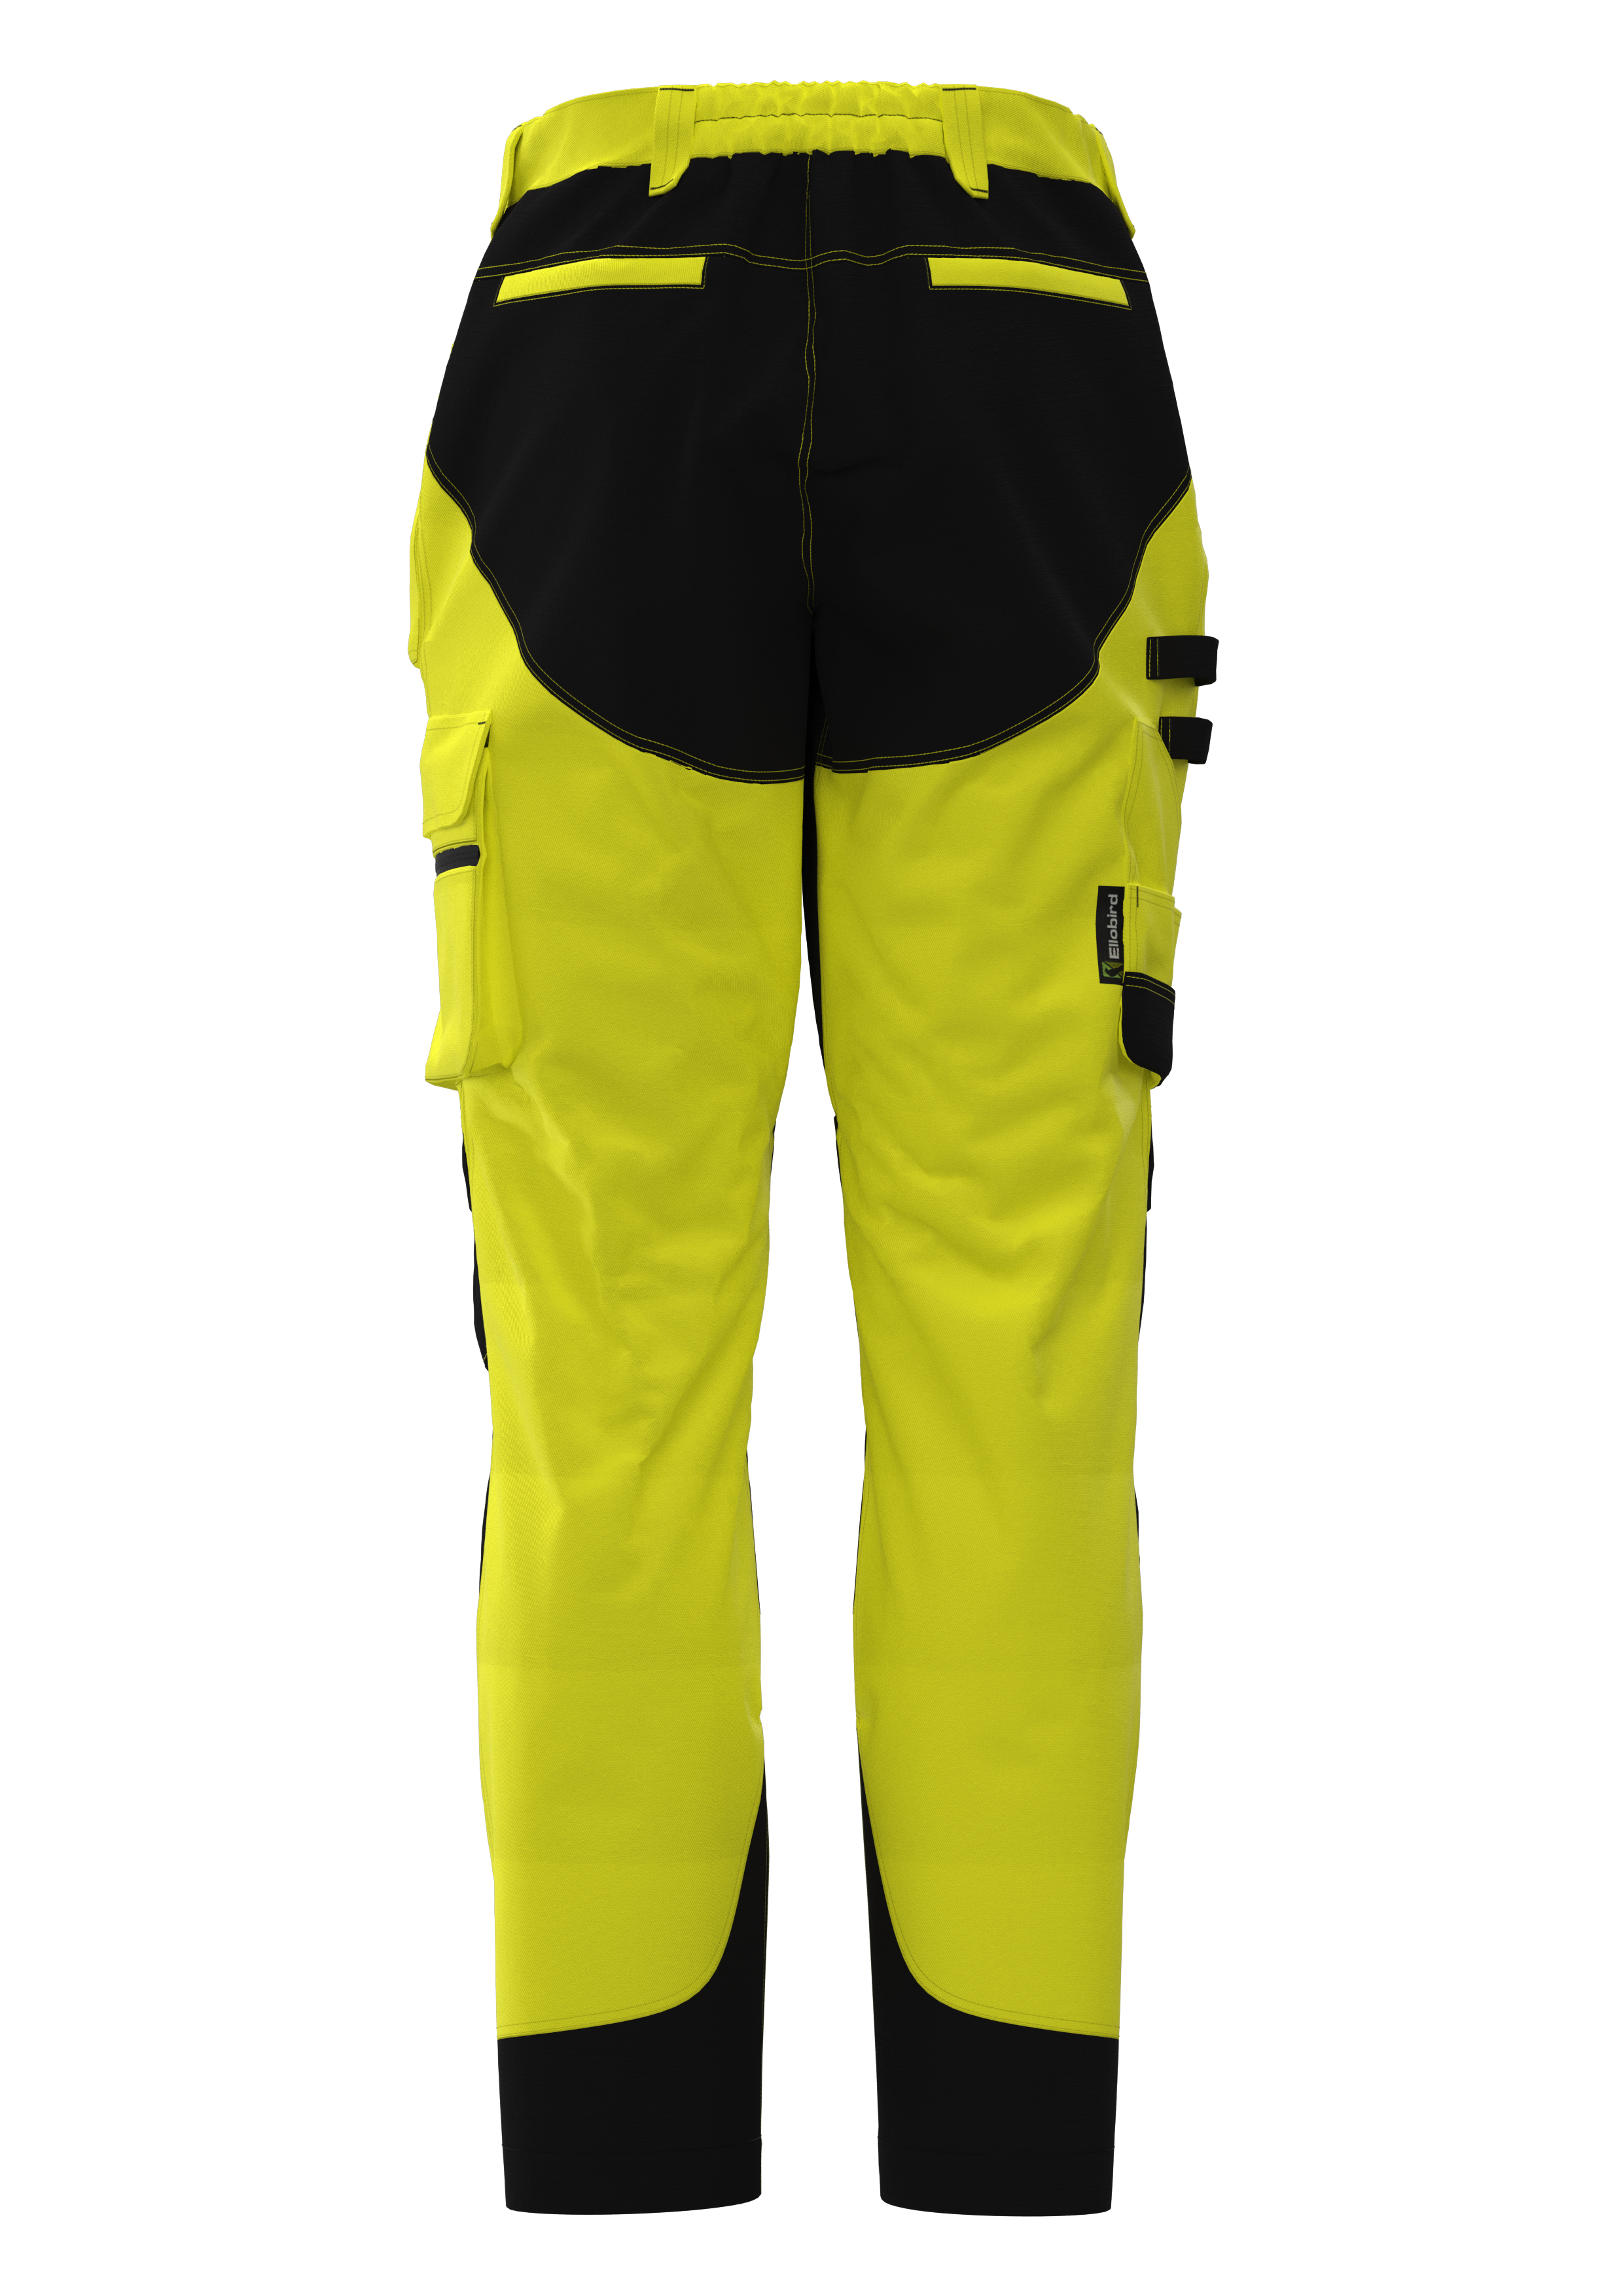 HANMEN Mens High Visibility Safety Reflective Pants Workwear Cargo Trousers  Work Casual Drawstring Elastic Waist Bottoms with Pockets Fluorescent  Green 2XL - Walmart.com